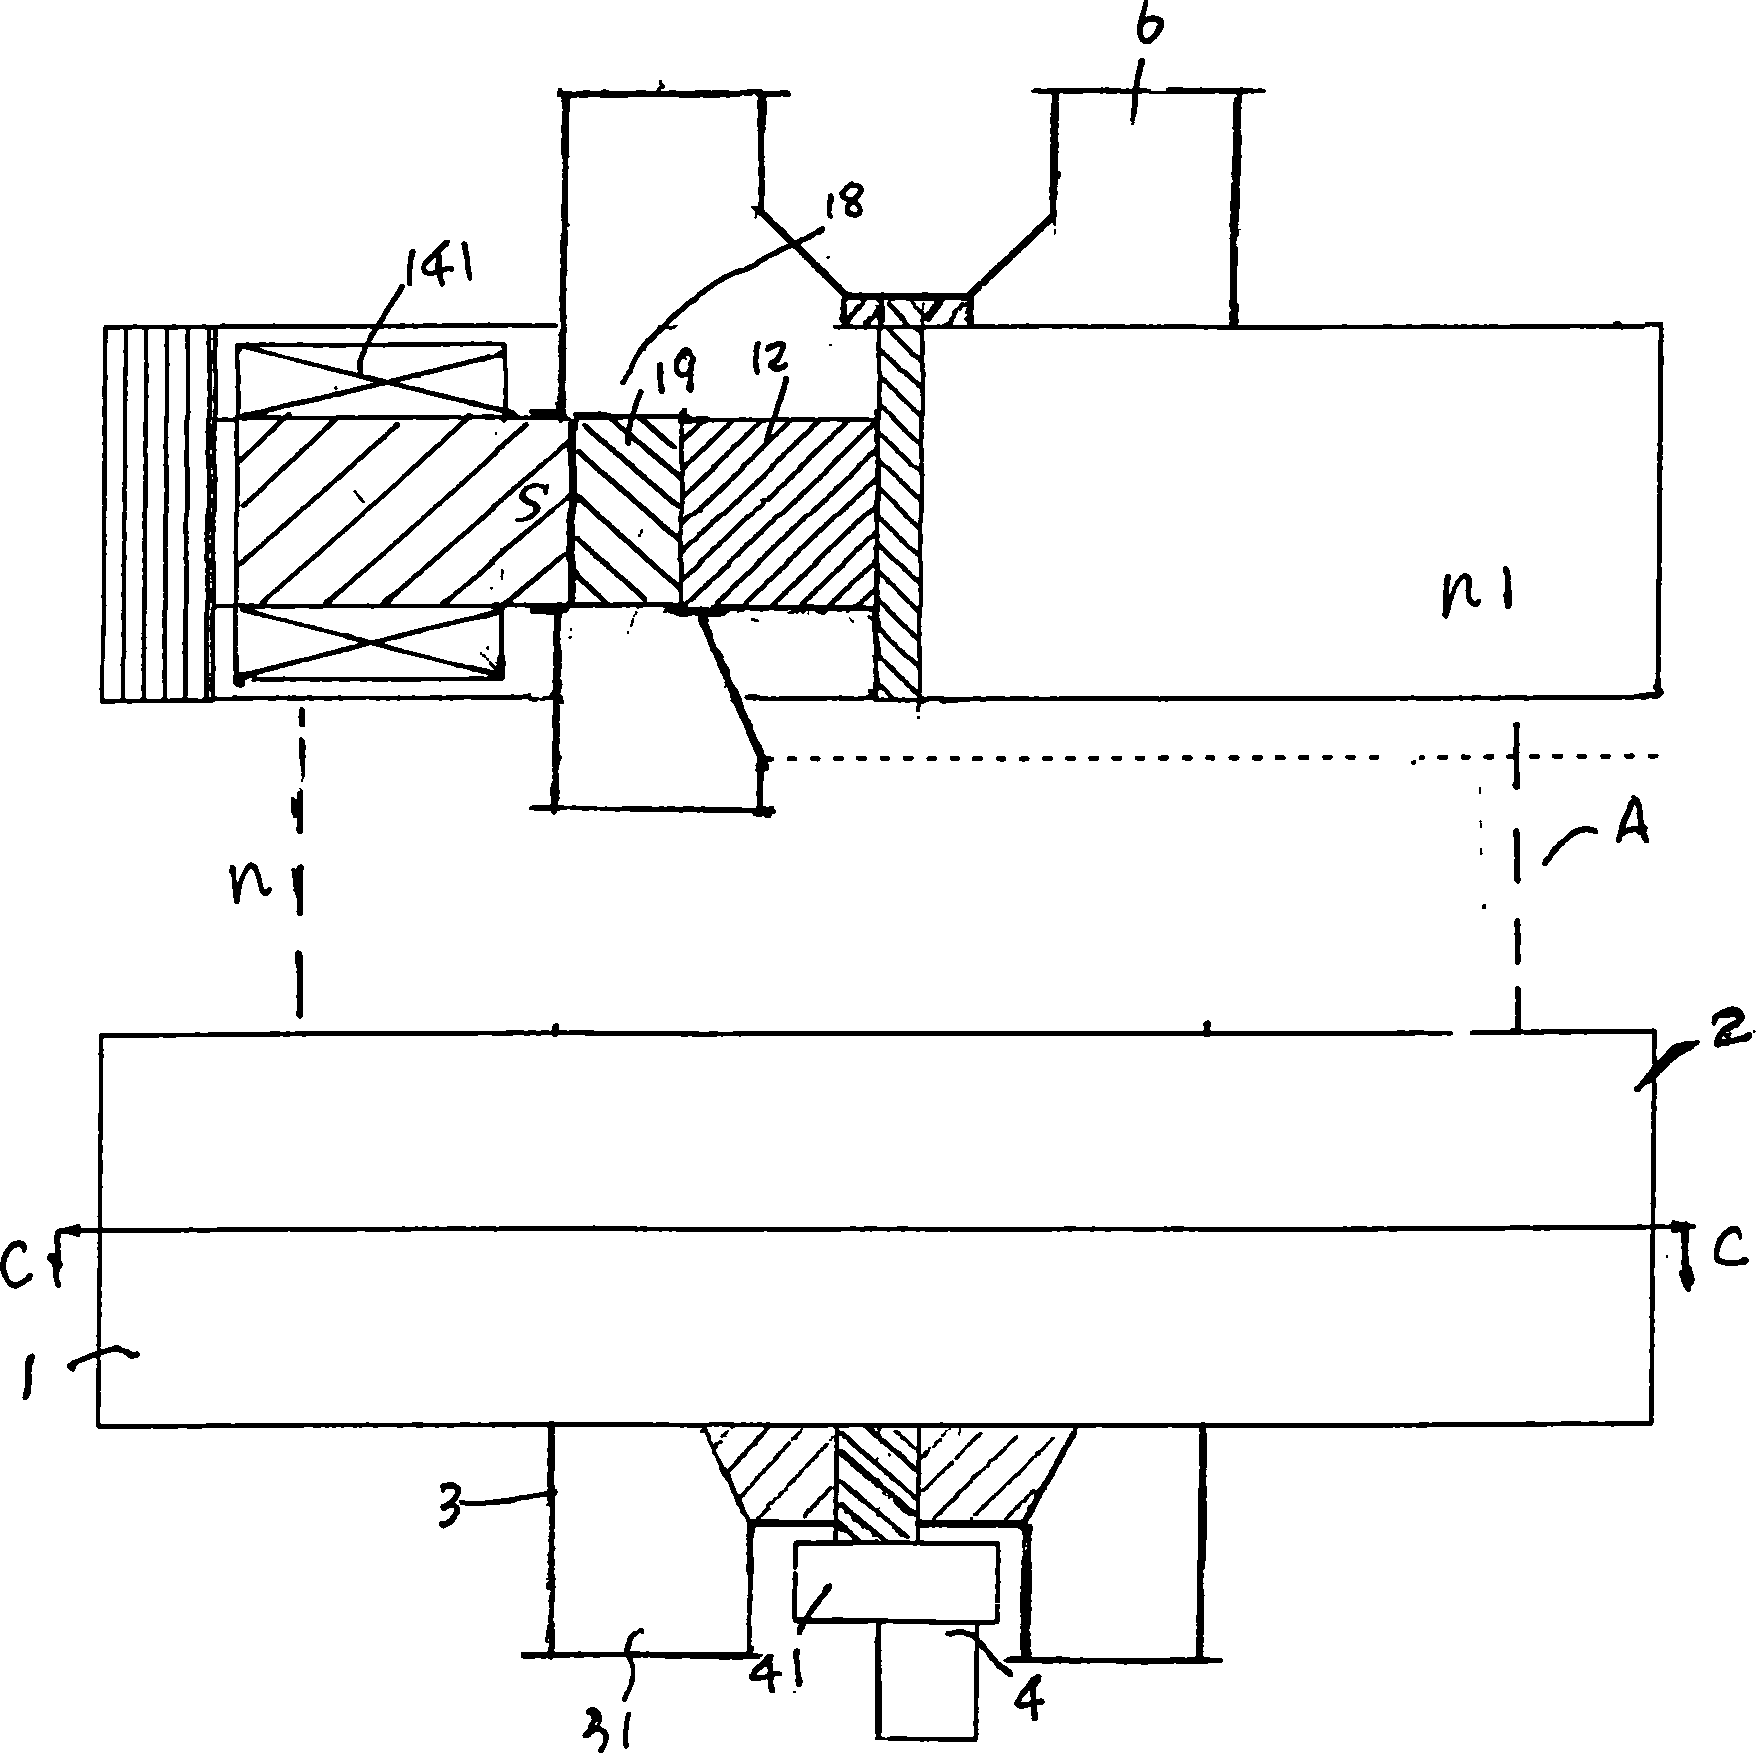 Dry ore dressing apparatus and its magnetic separating unit